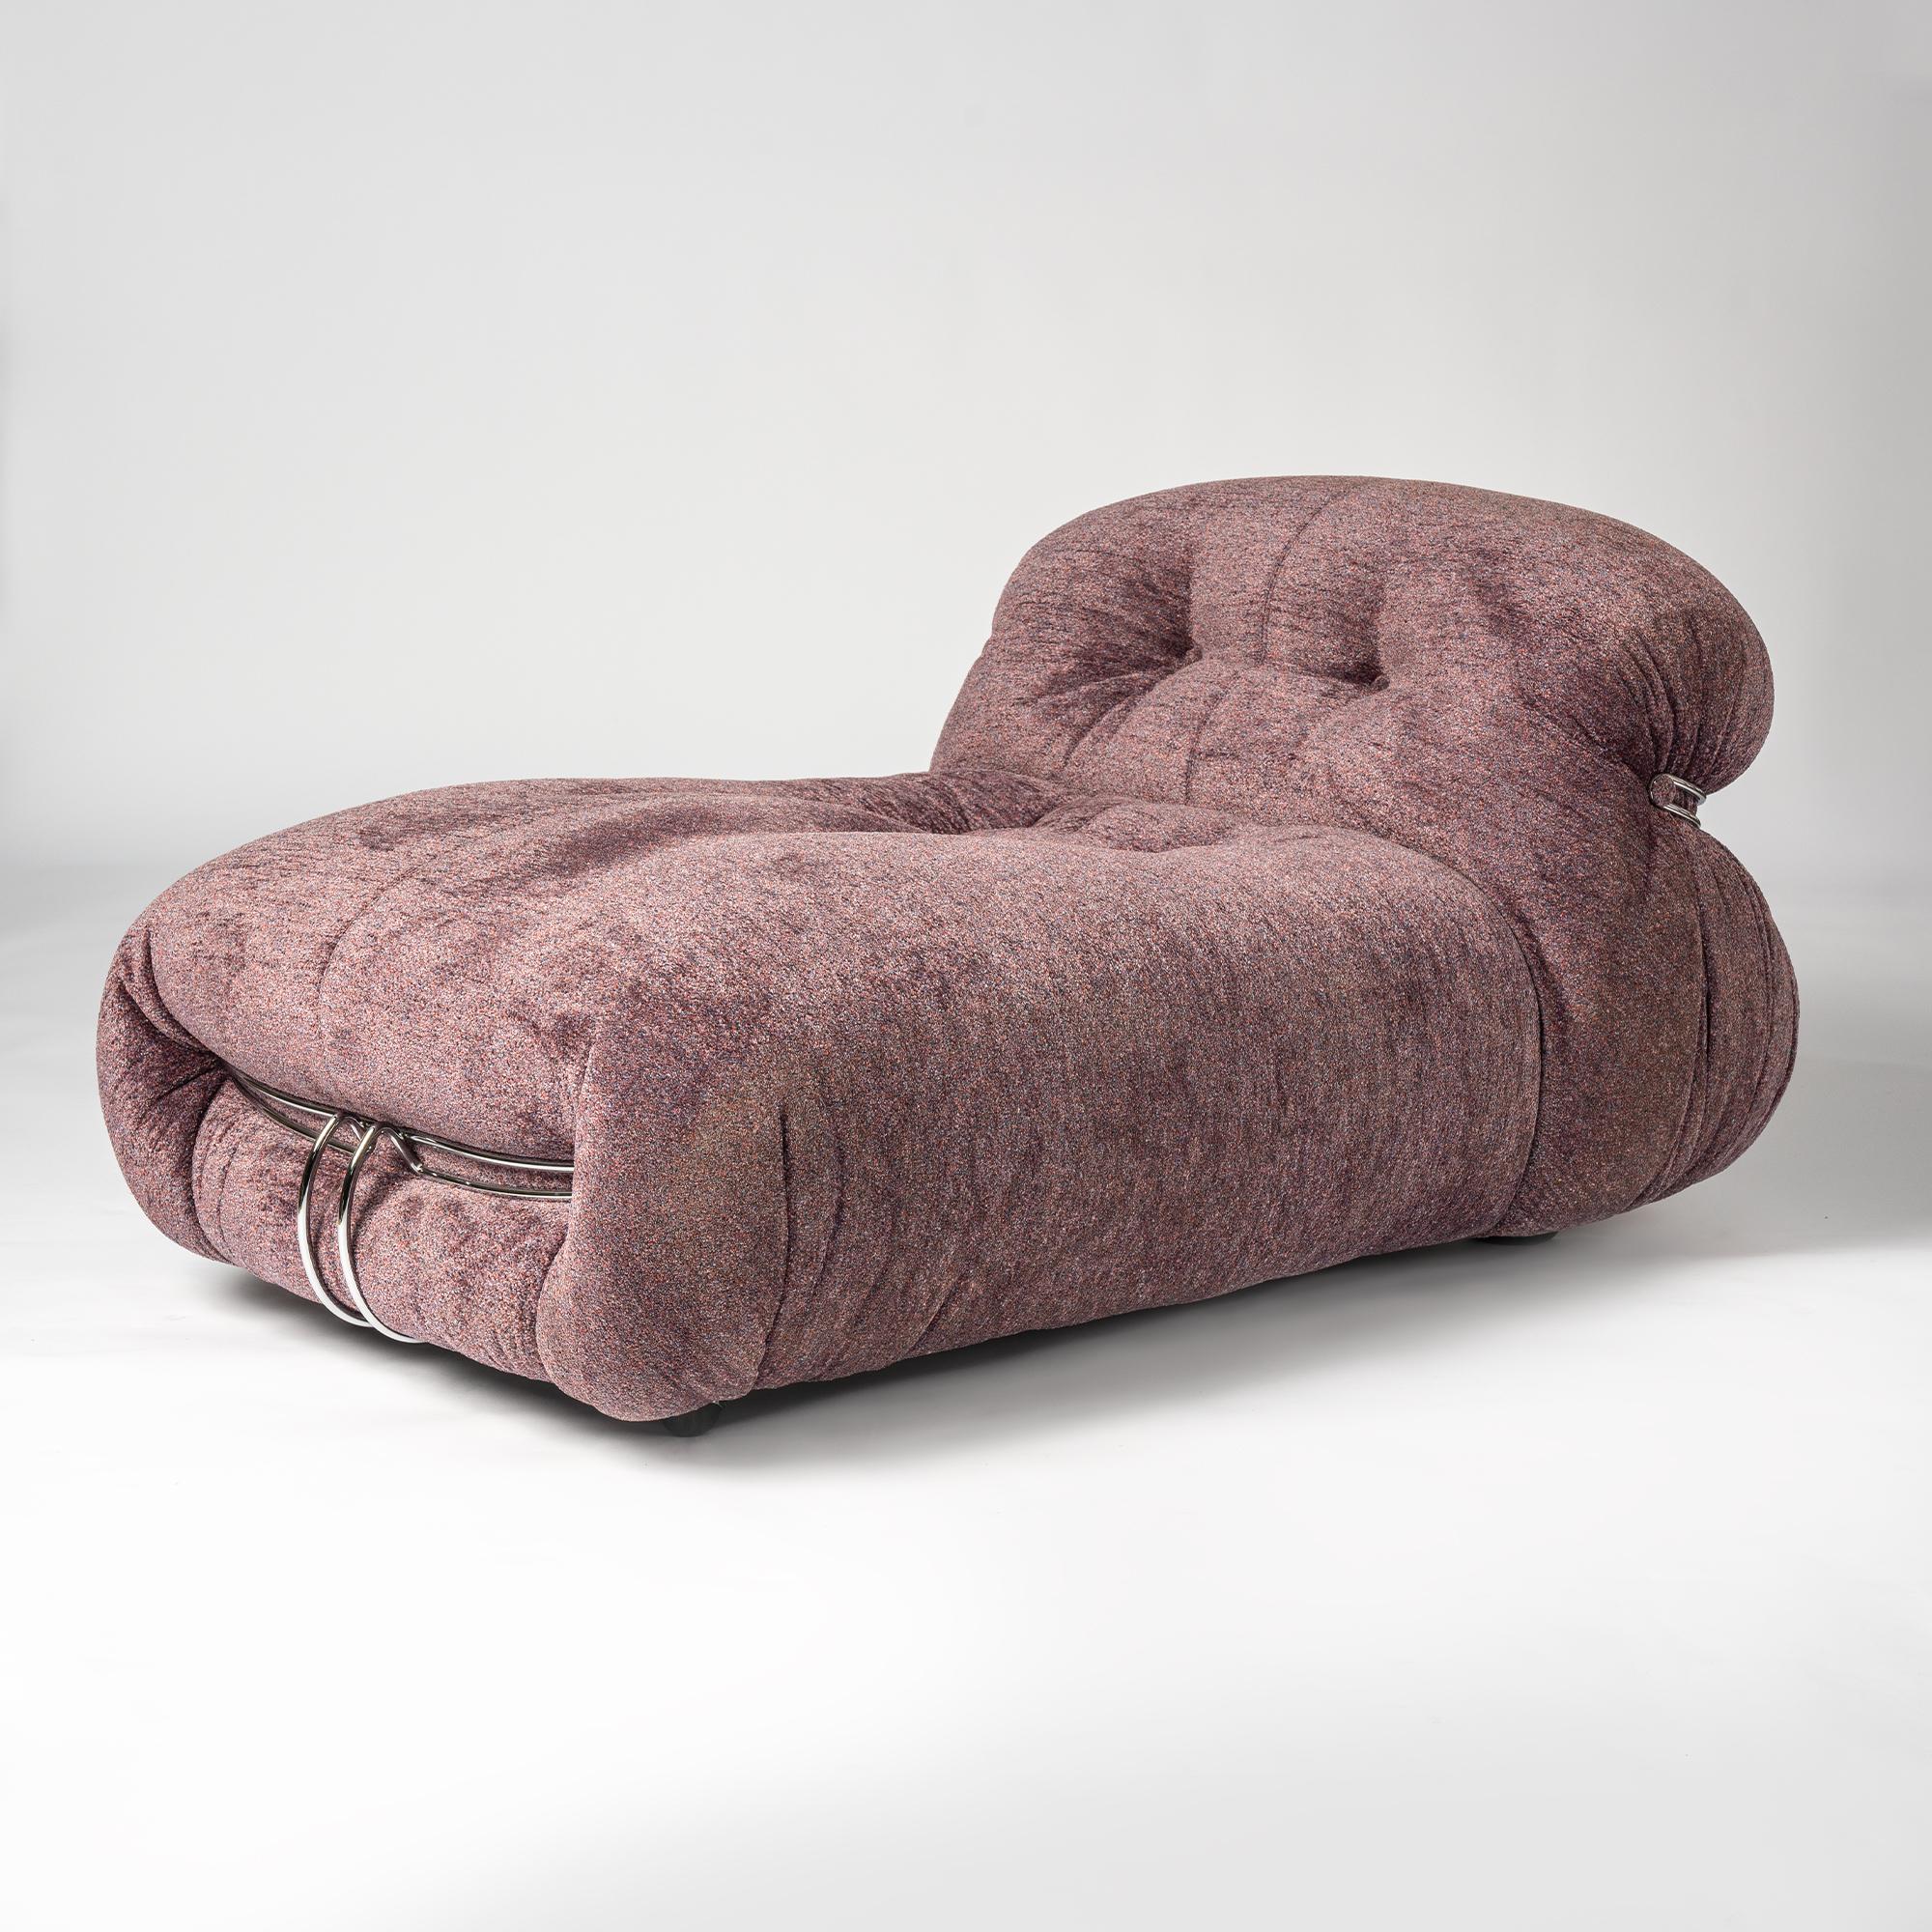 Rare Soriana chaise longue by Afra & Tobia Scarpa for Cassina, Italy, 1969
It's reupholstered in a beautiful plum textured fabric.
The original foam is in very good condition and shows its characteristic round and bulky shape. The concept behind